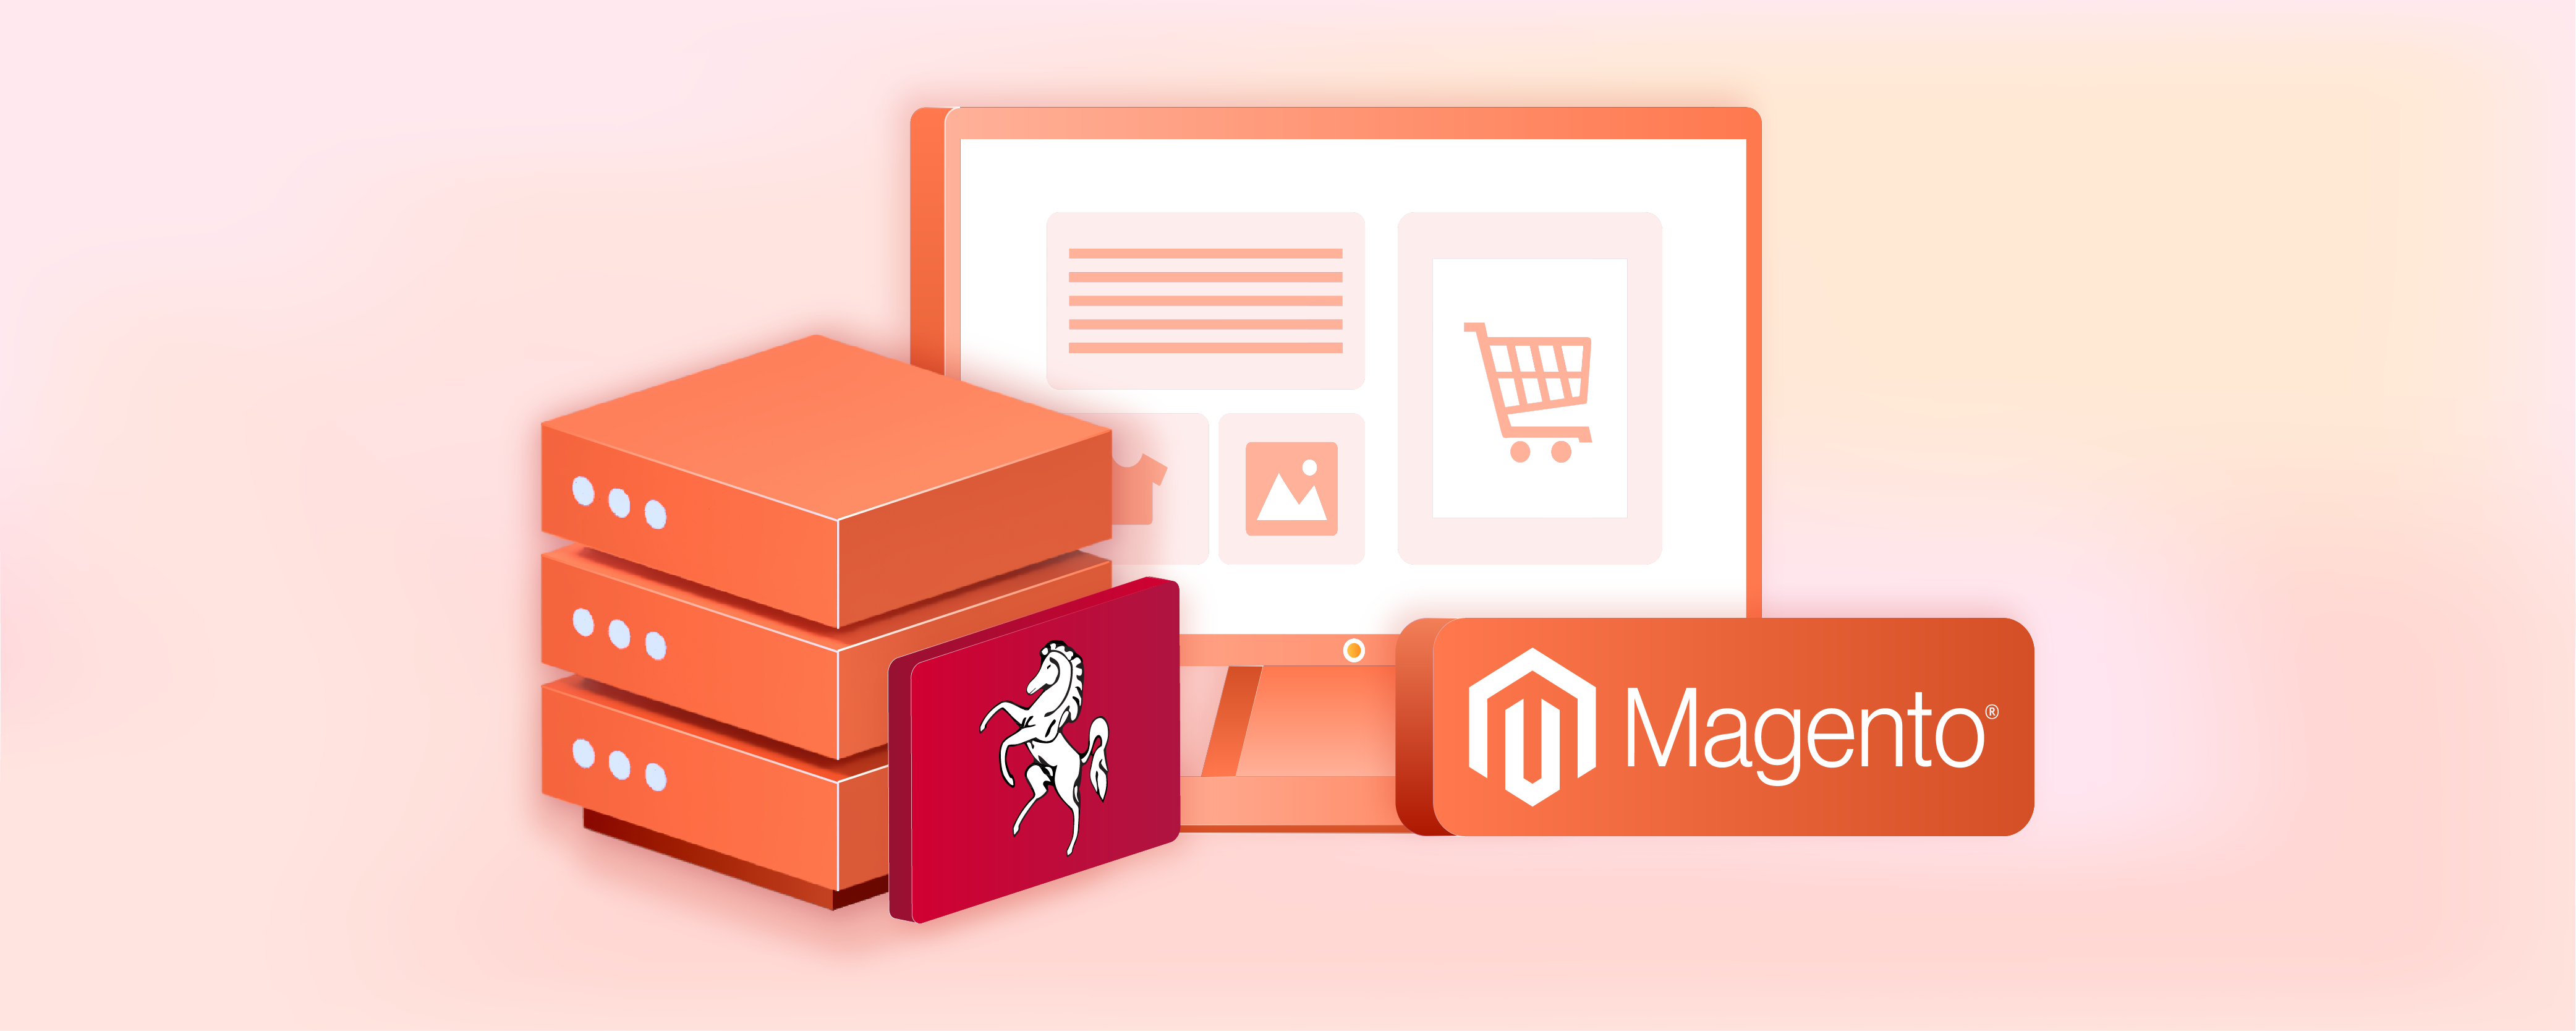 Magento Web Hosting Kent: Challenges and Factors